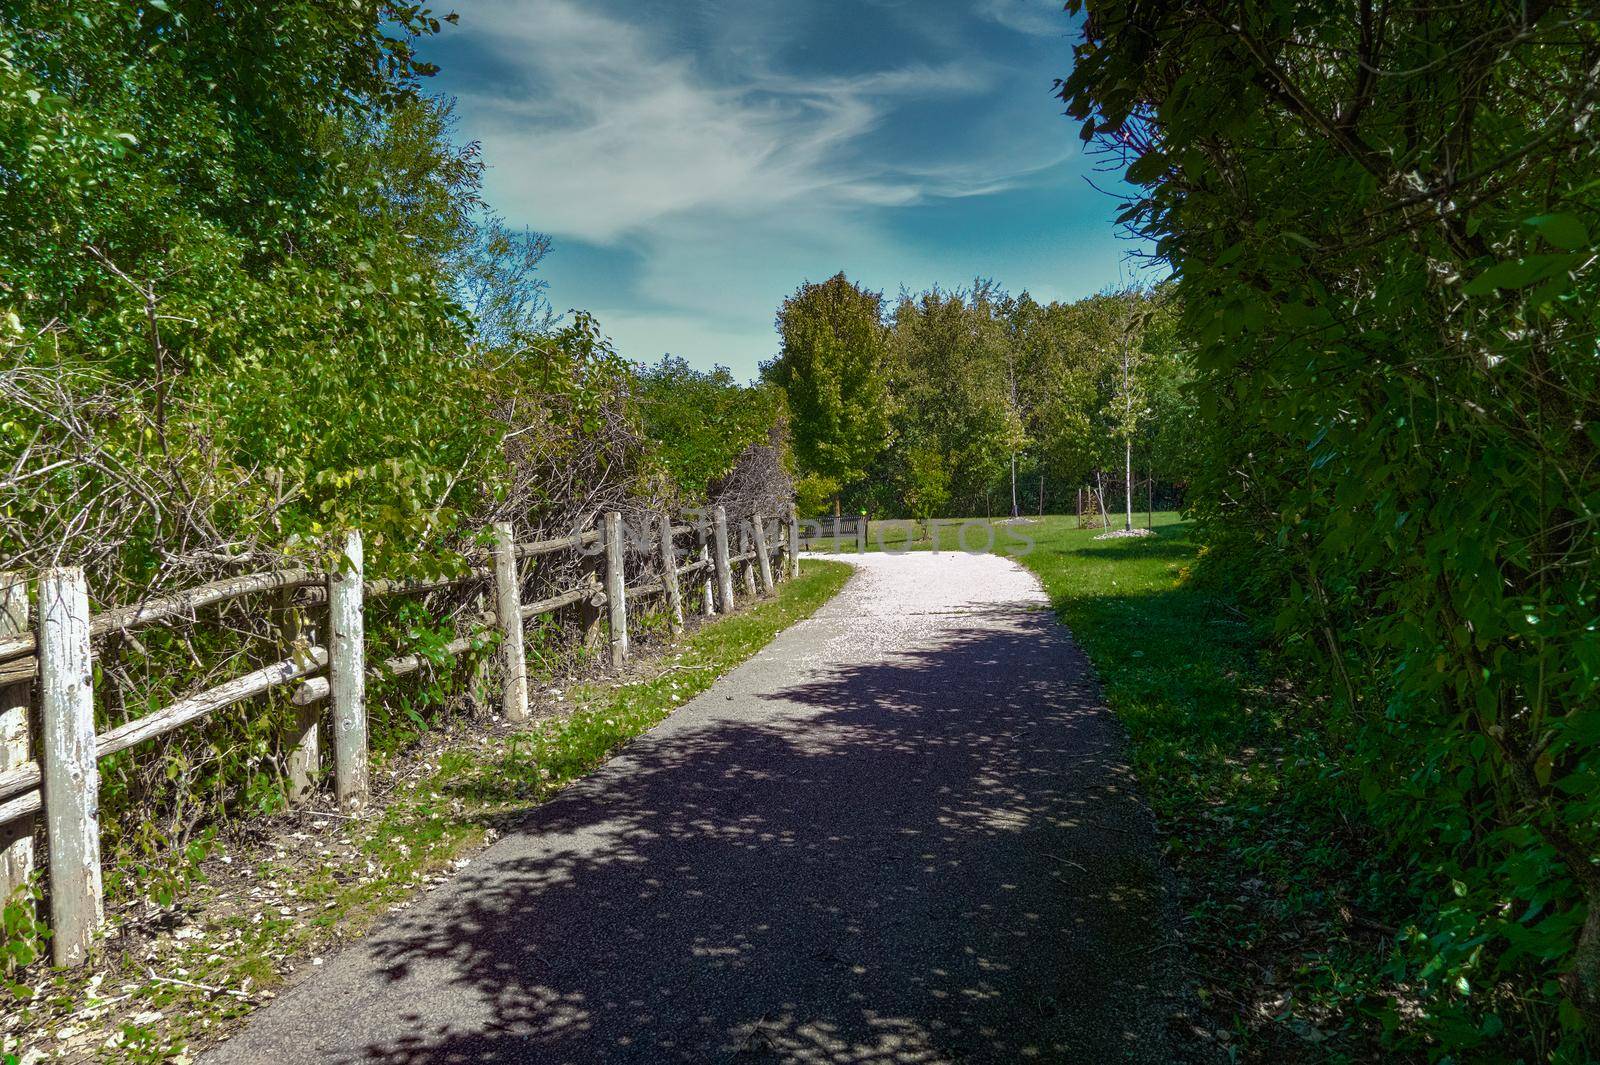 Wooden fence along the road to the park copy by ben44